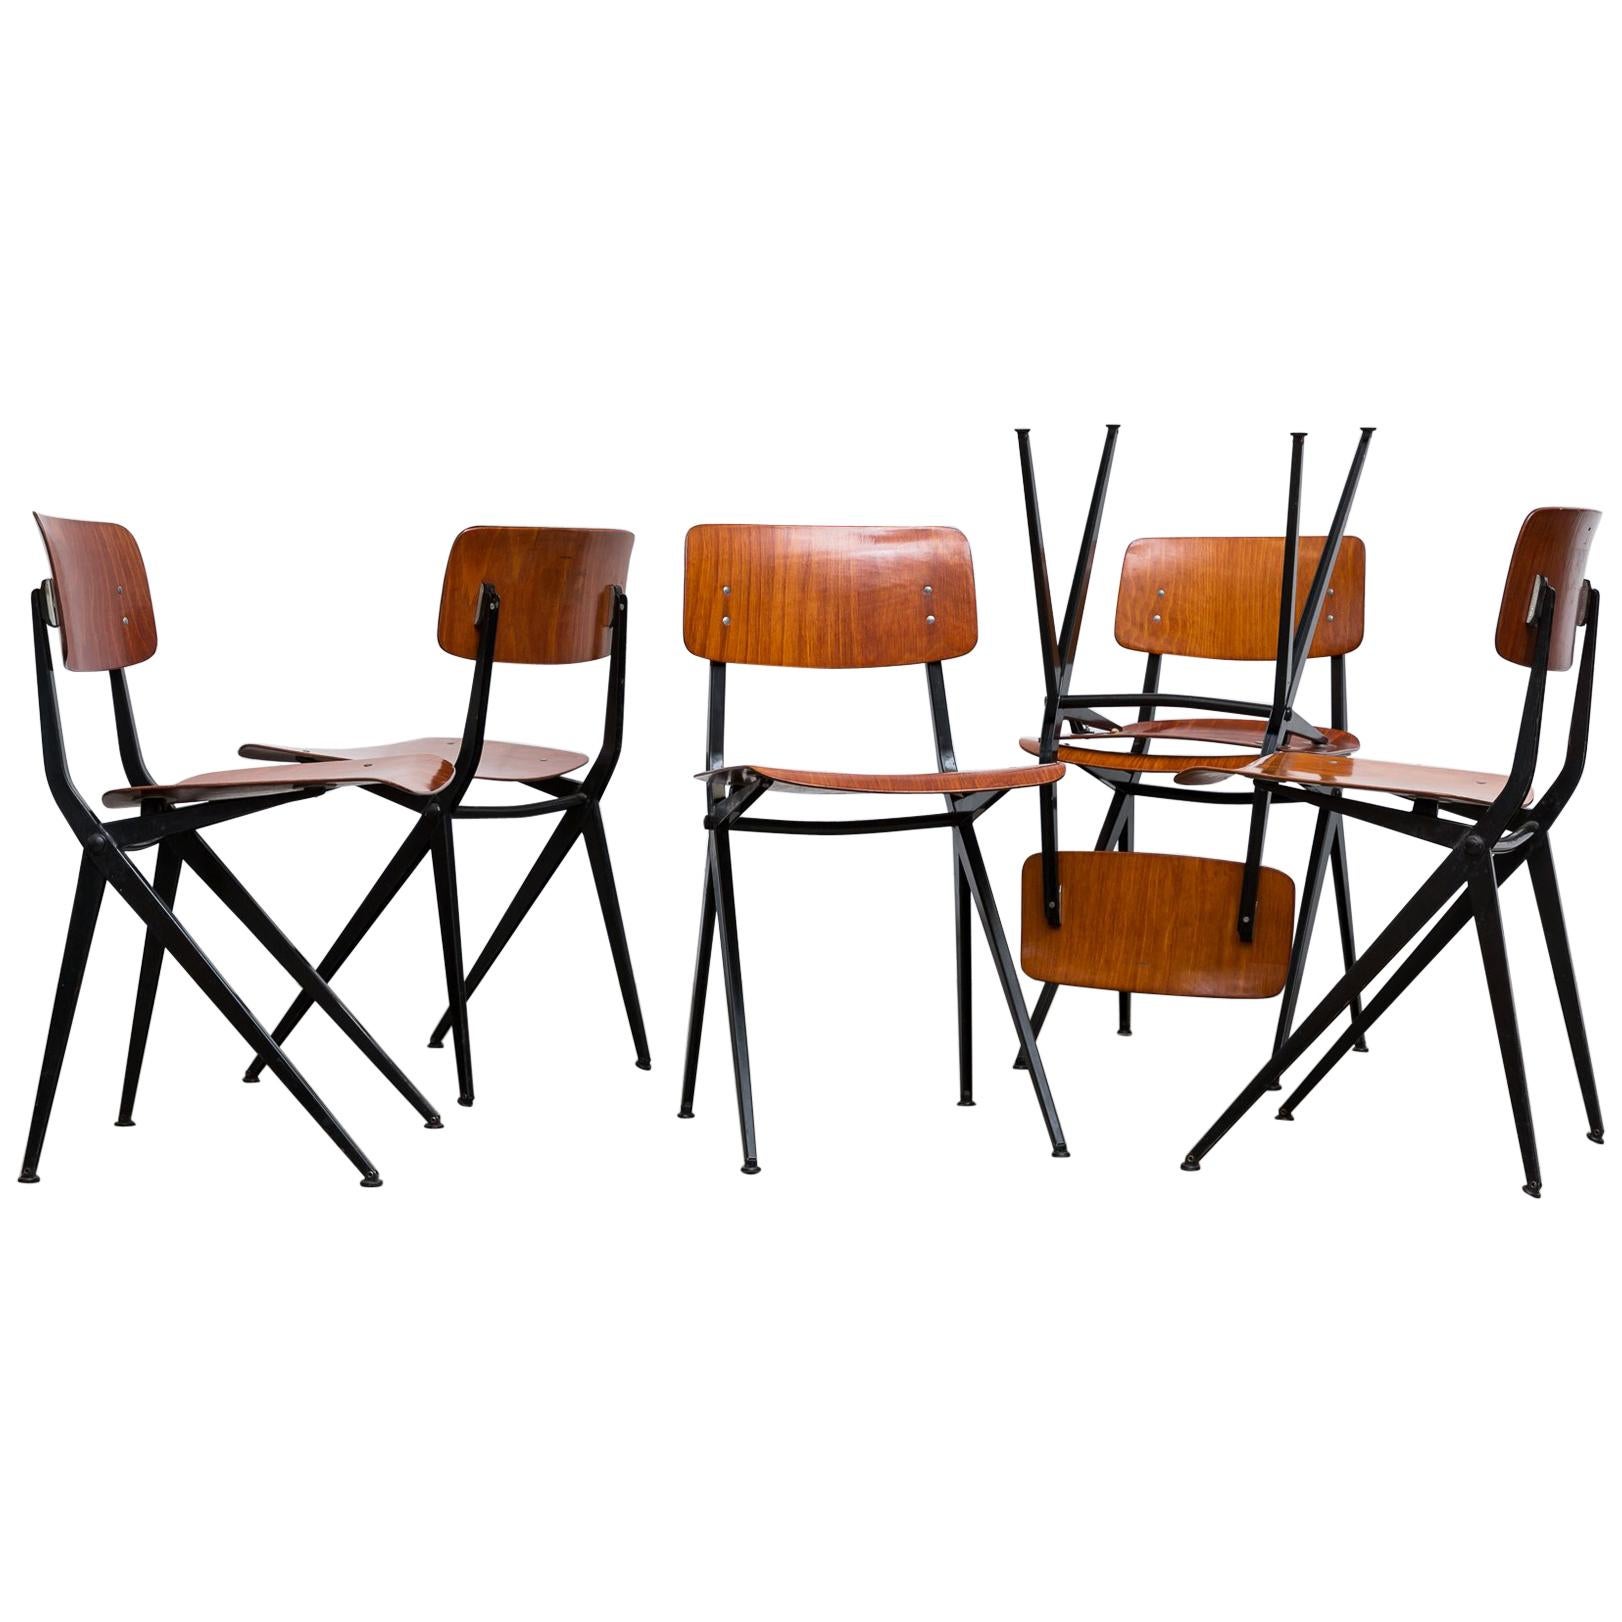 Set of 6 Jean Prouve and Friso Kramer Style School Chairs